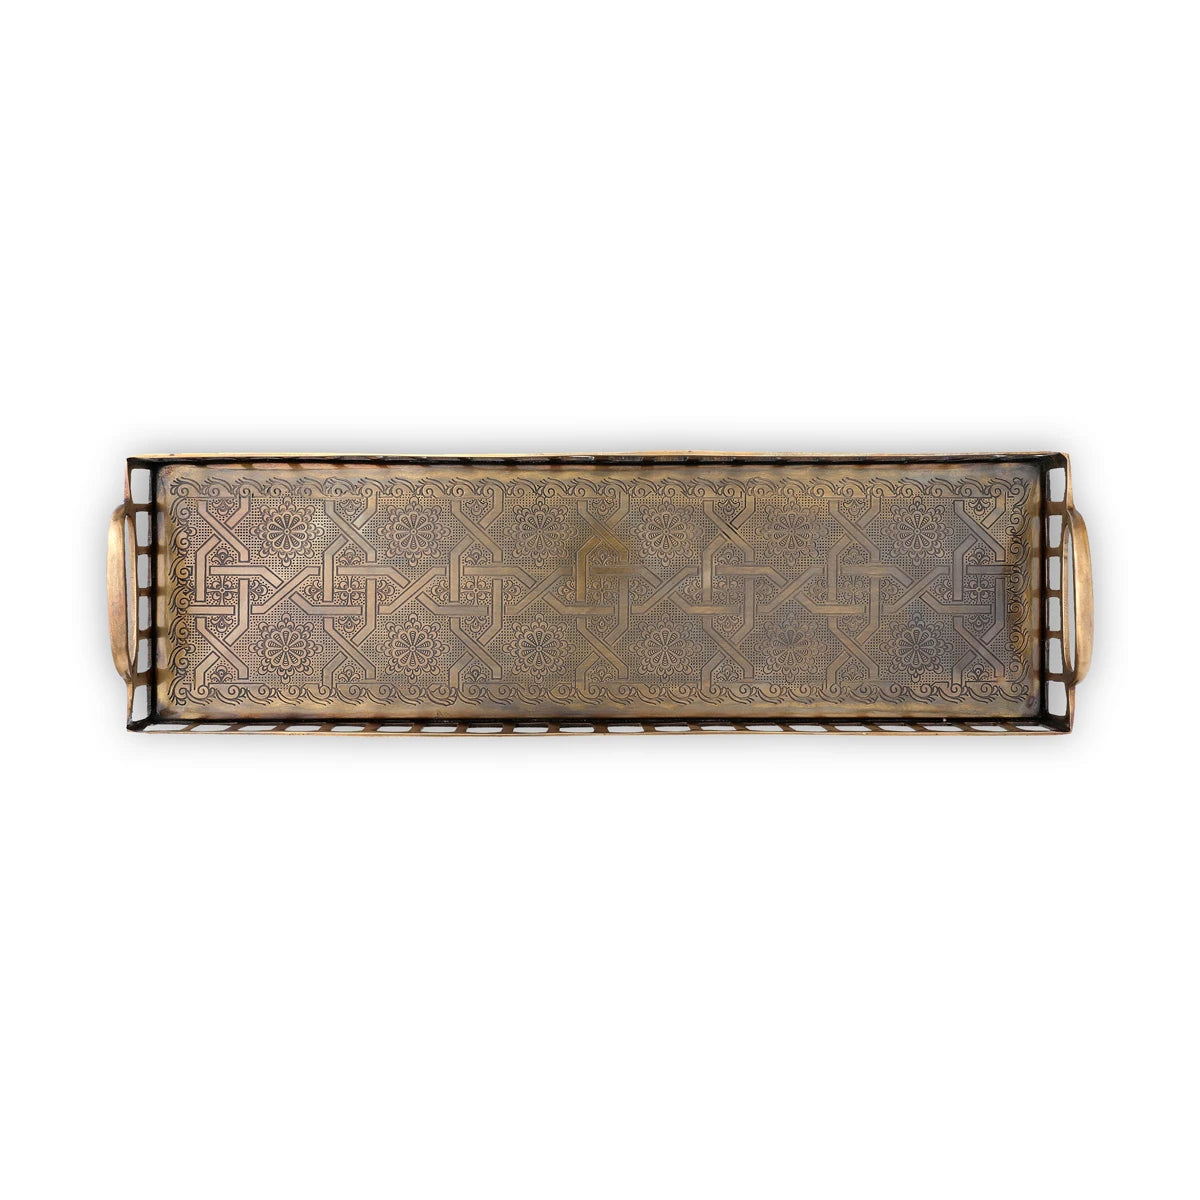 Top View of Rectangular Brass Tray - Brown